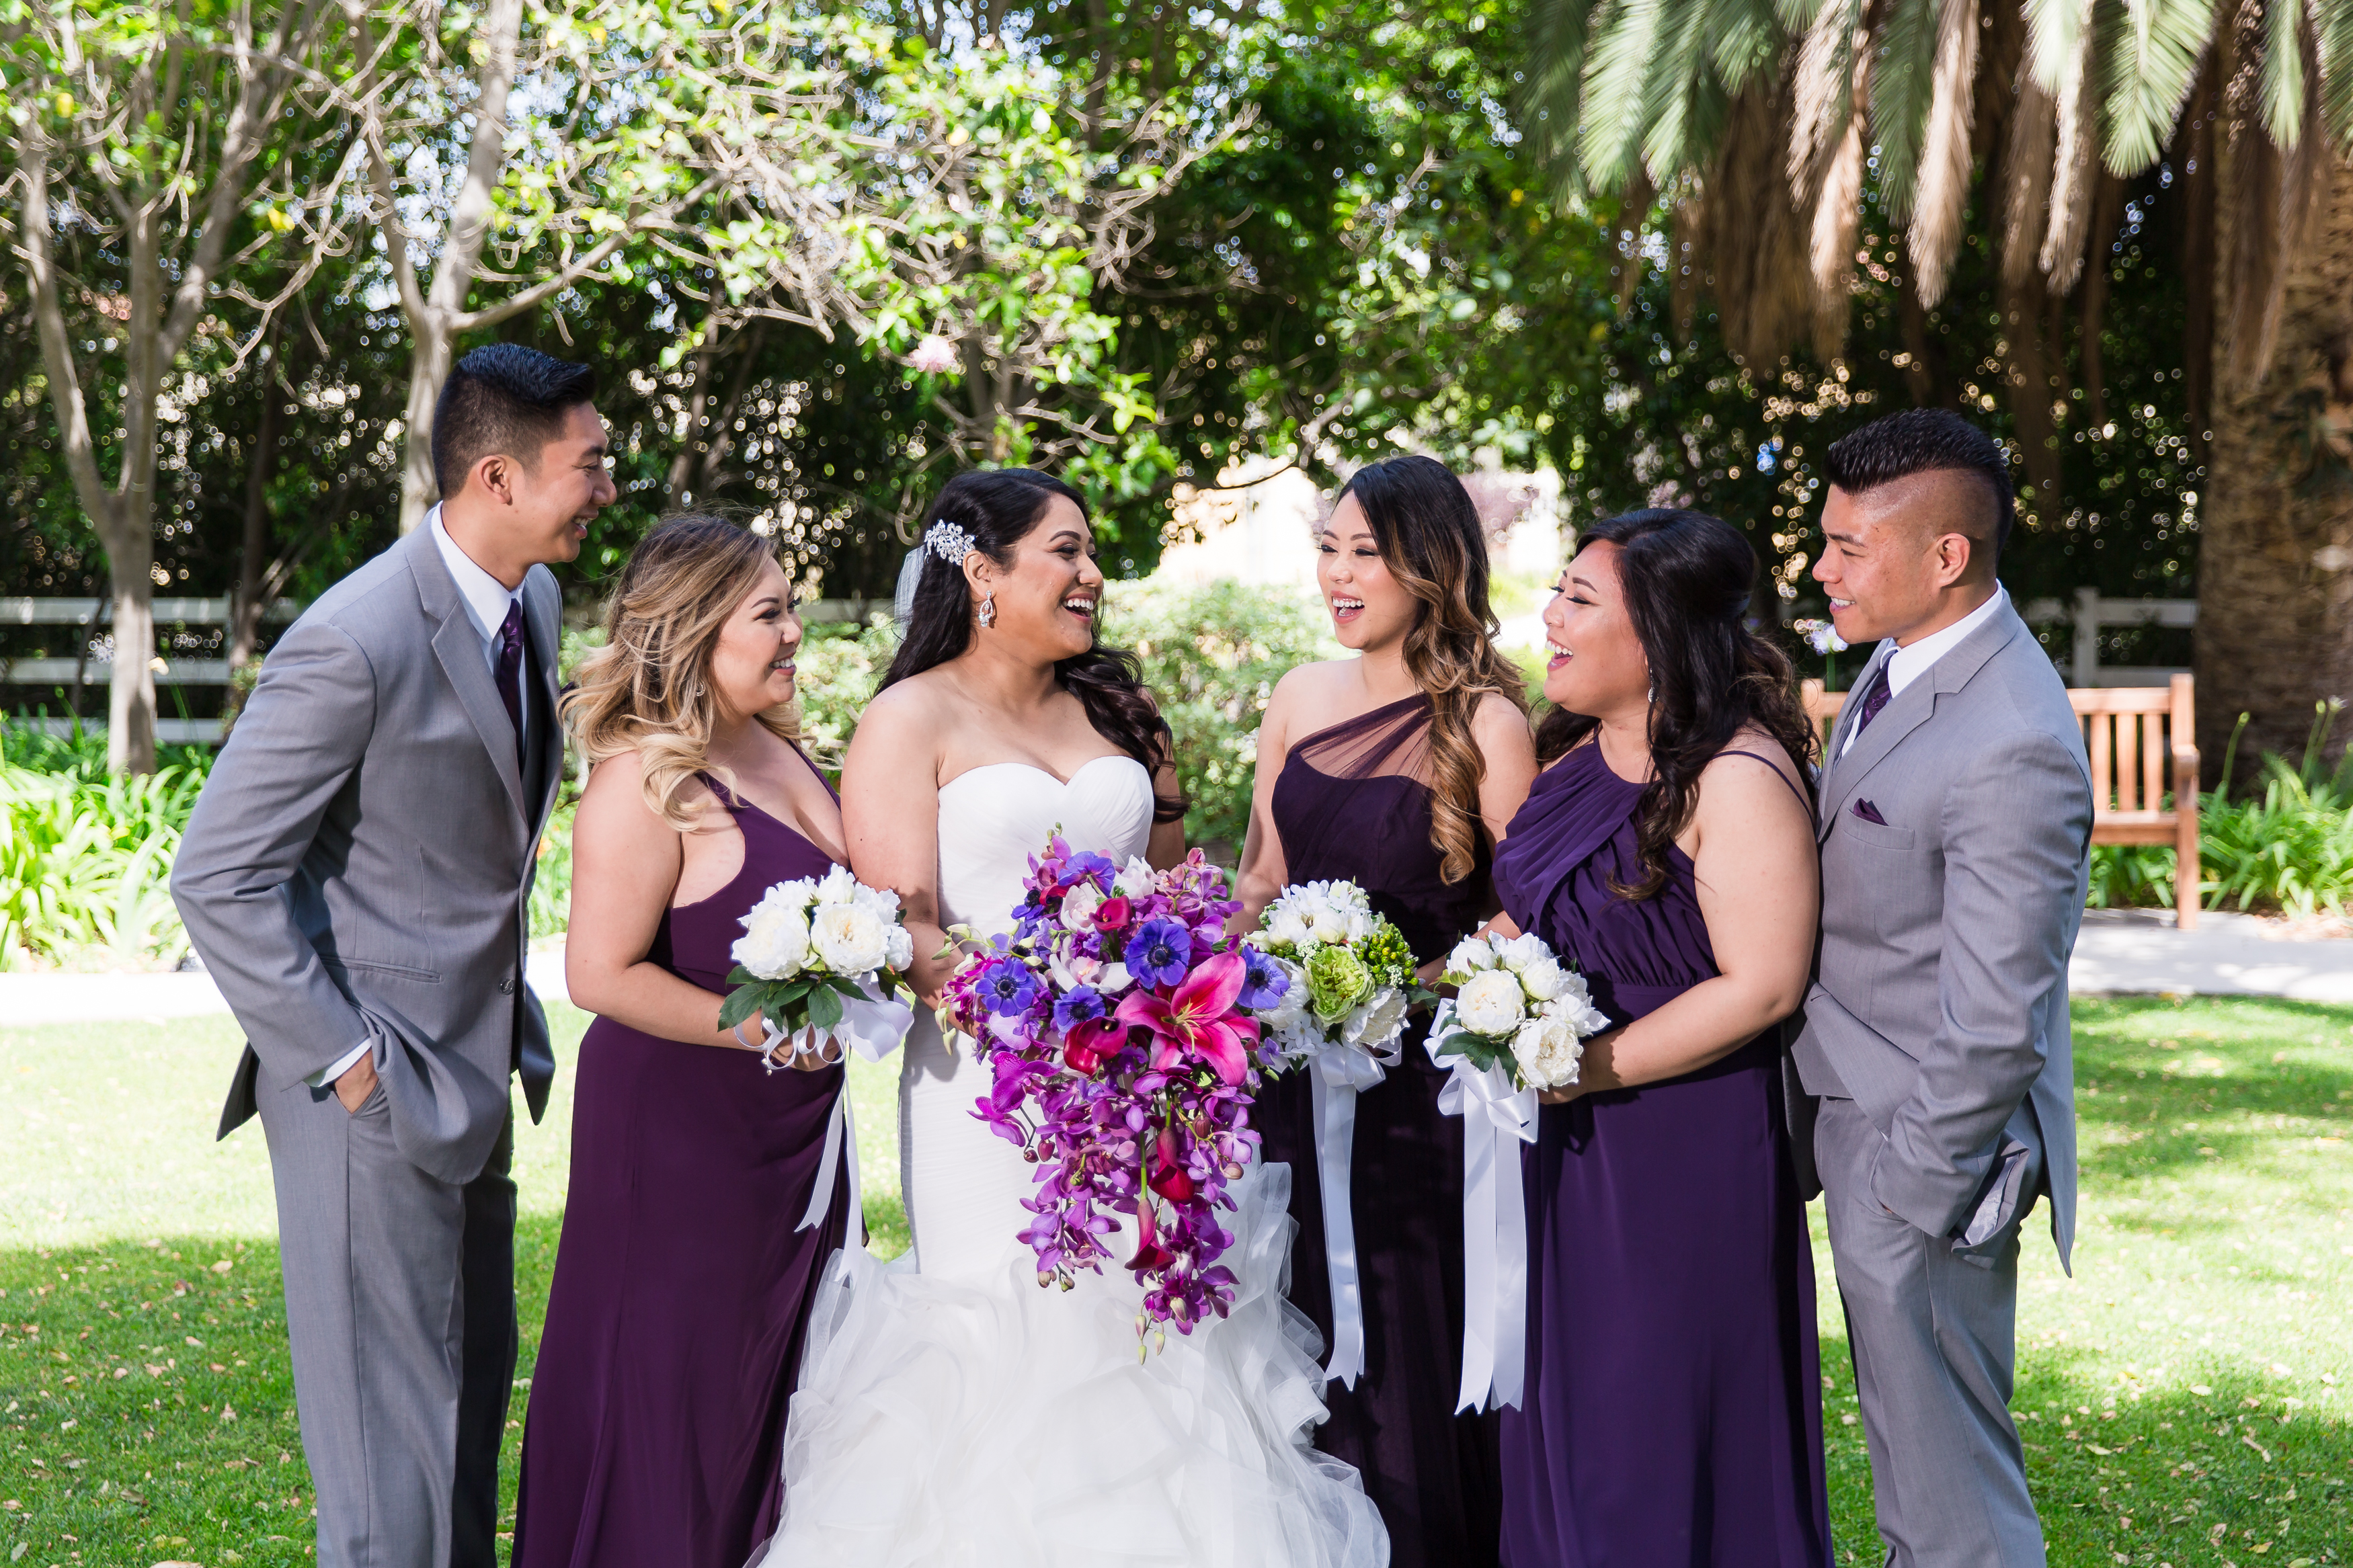 Wedding party laughing in towards each other surrounded by trees